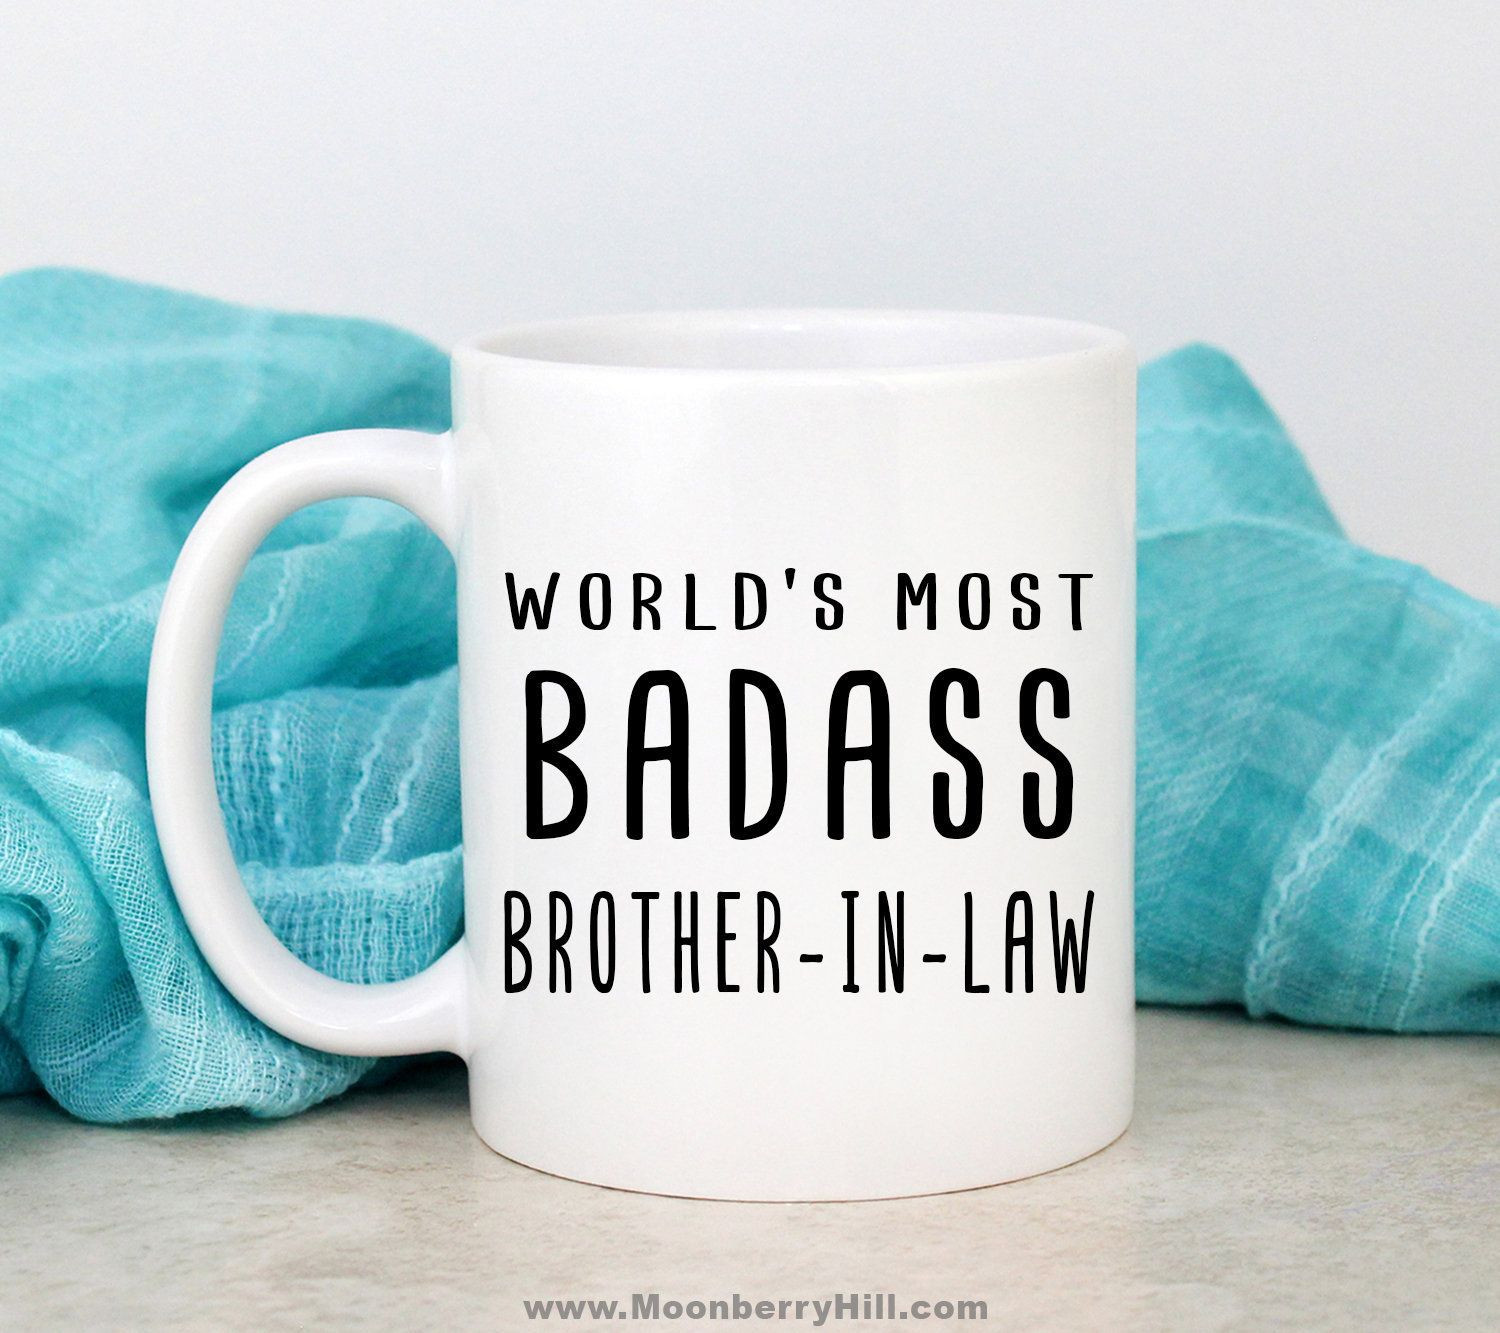 Gift Ideas For Brother In Law Birthday
 Badbass Brother In Law Gift Gift For Brother In Law